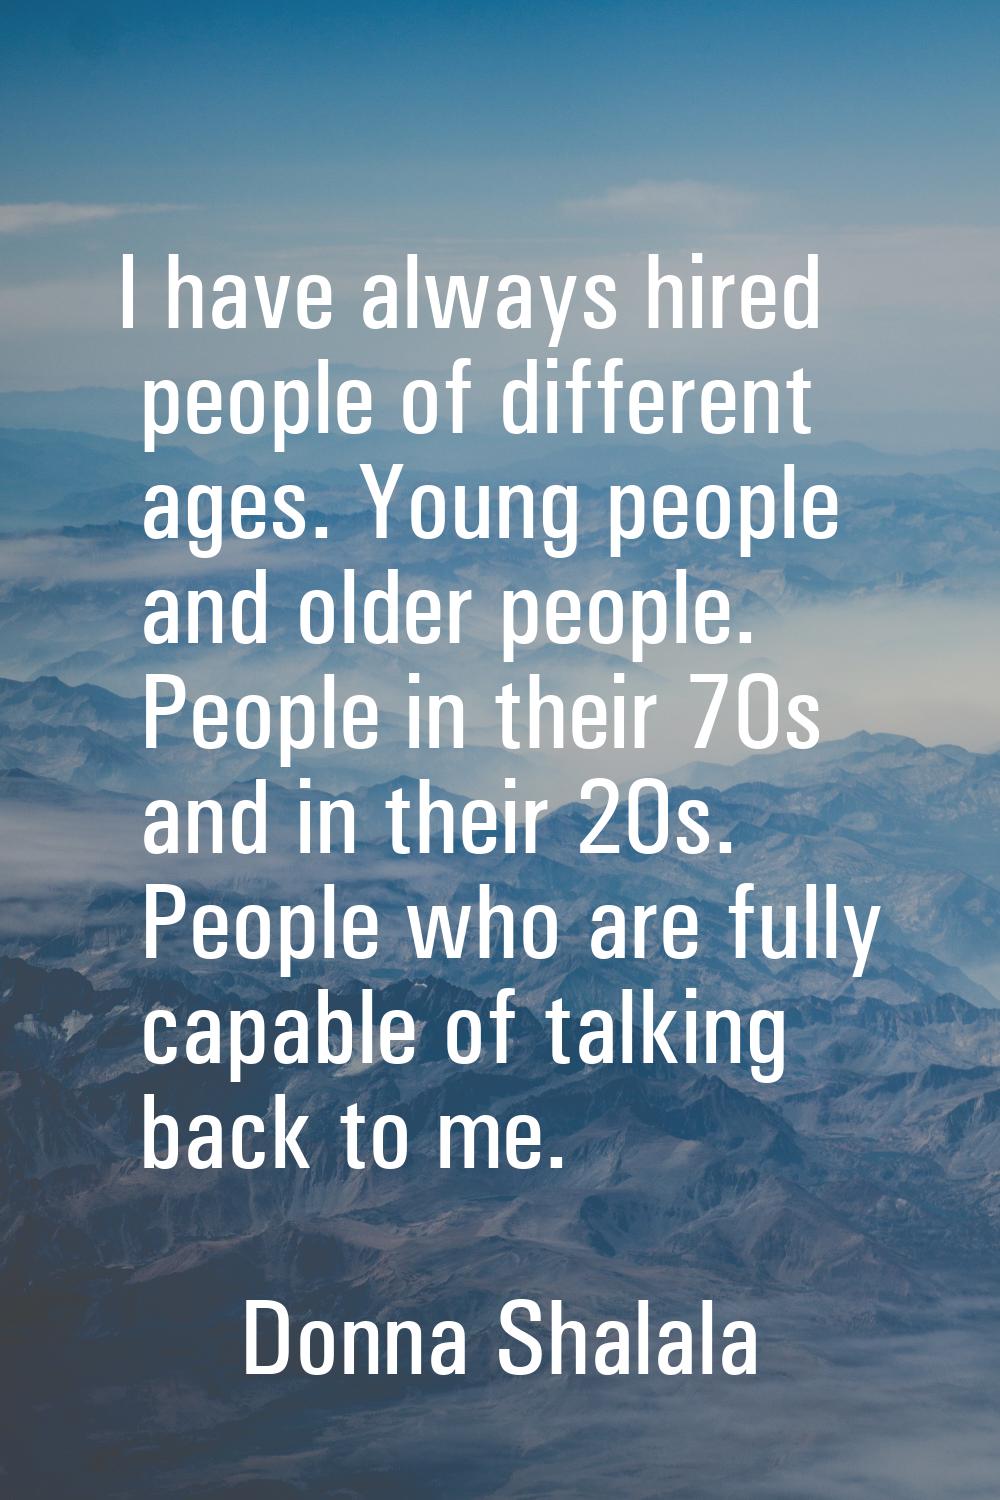 I have always hired people of different ages. Young people and older people. People in their 70s an